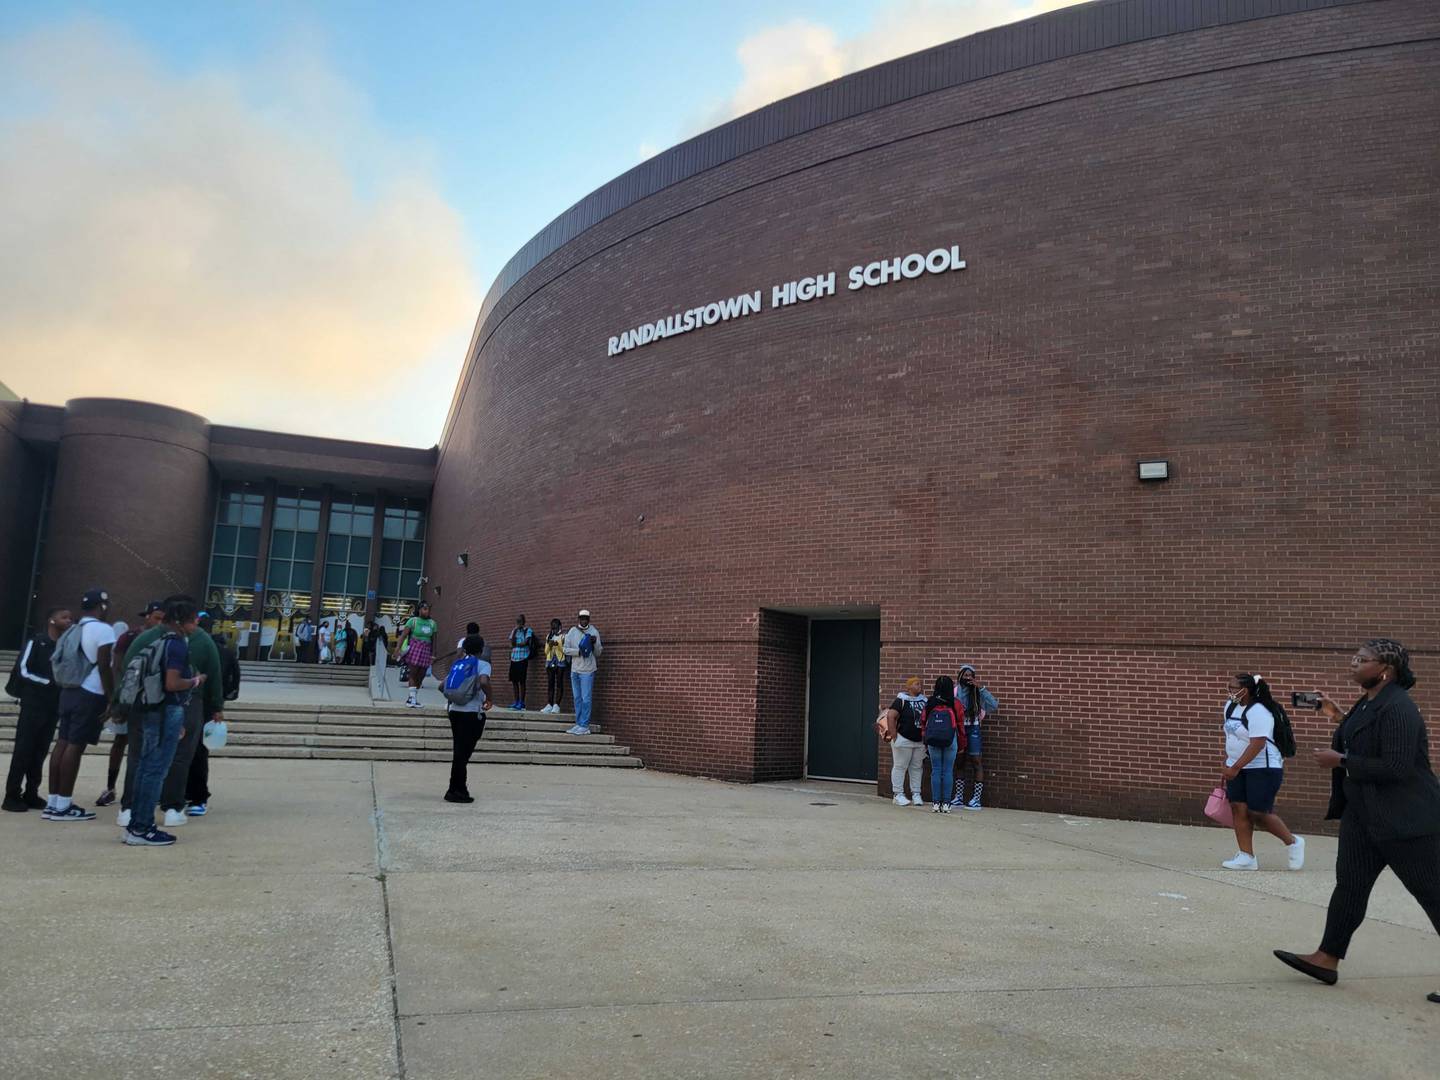 Students get ready for the first day of school at Randallstown High School, September 2022.